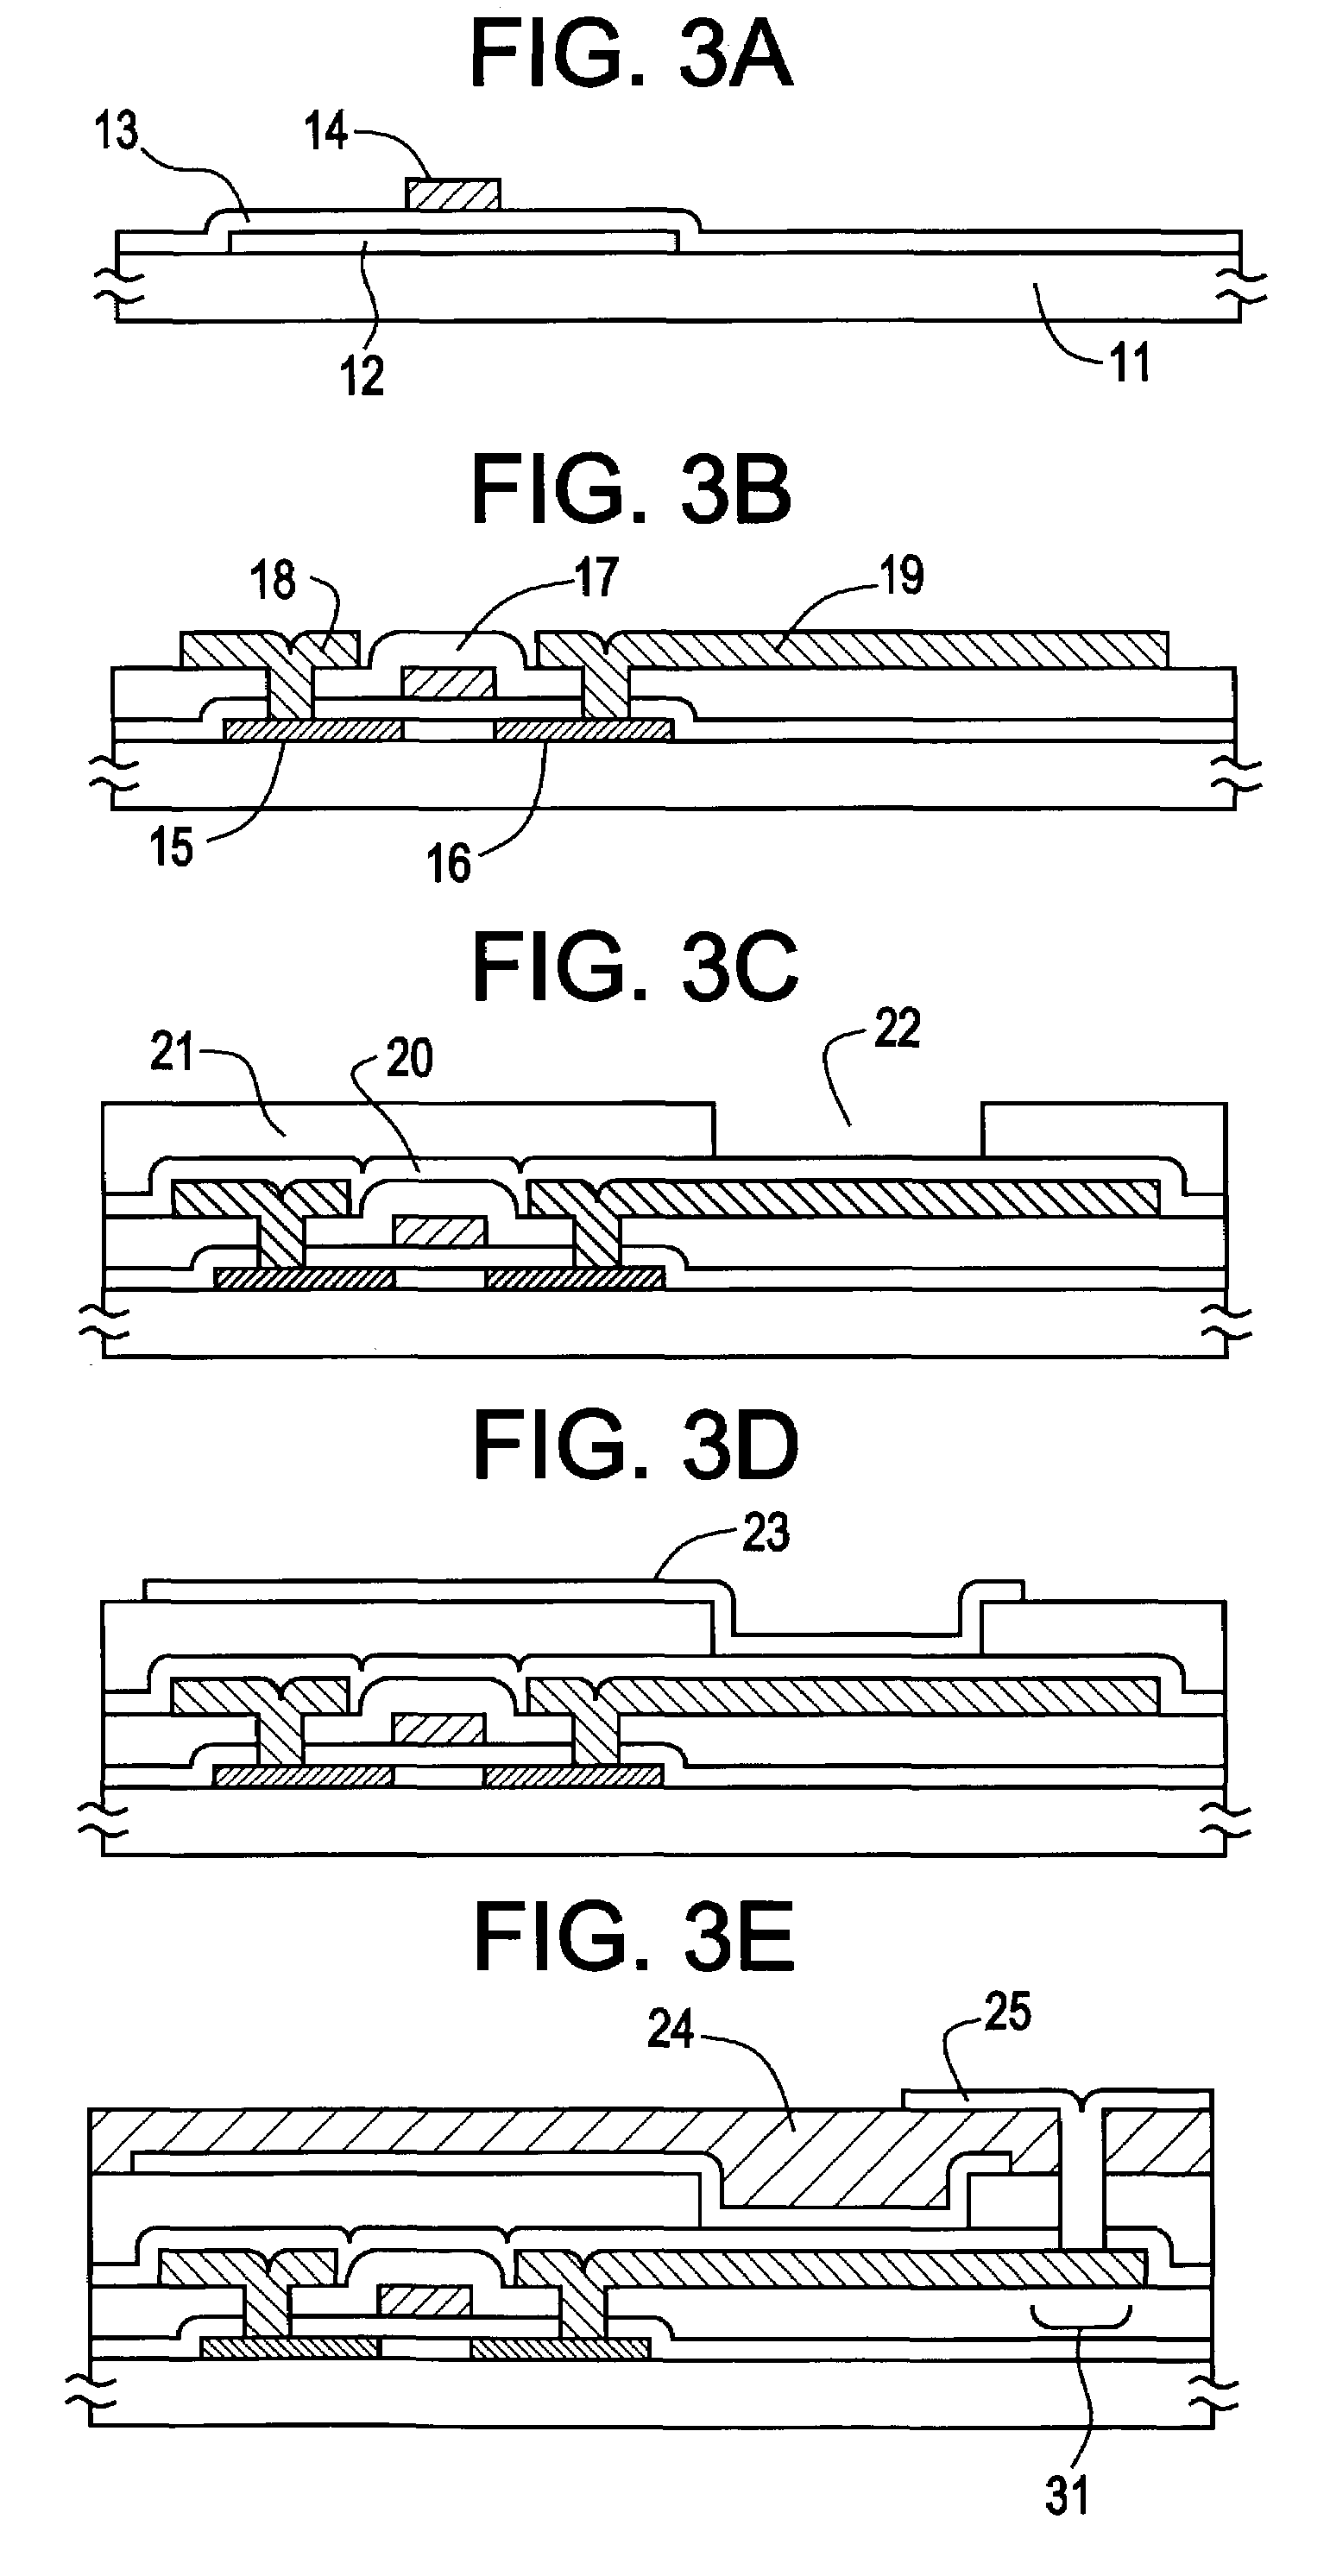 Semiconductor device having thin film transistor with particular drain electrode